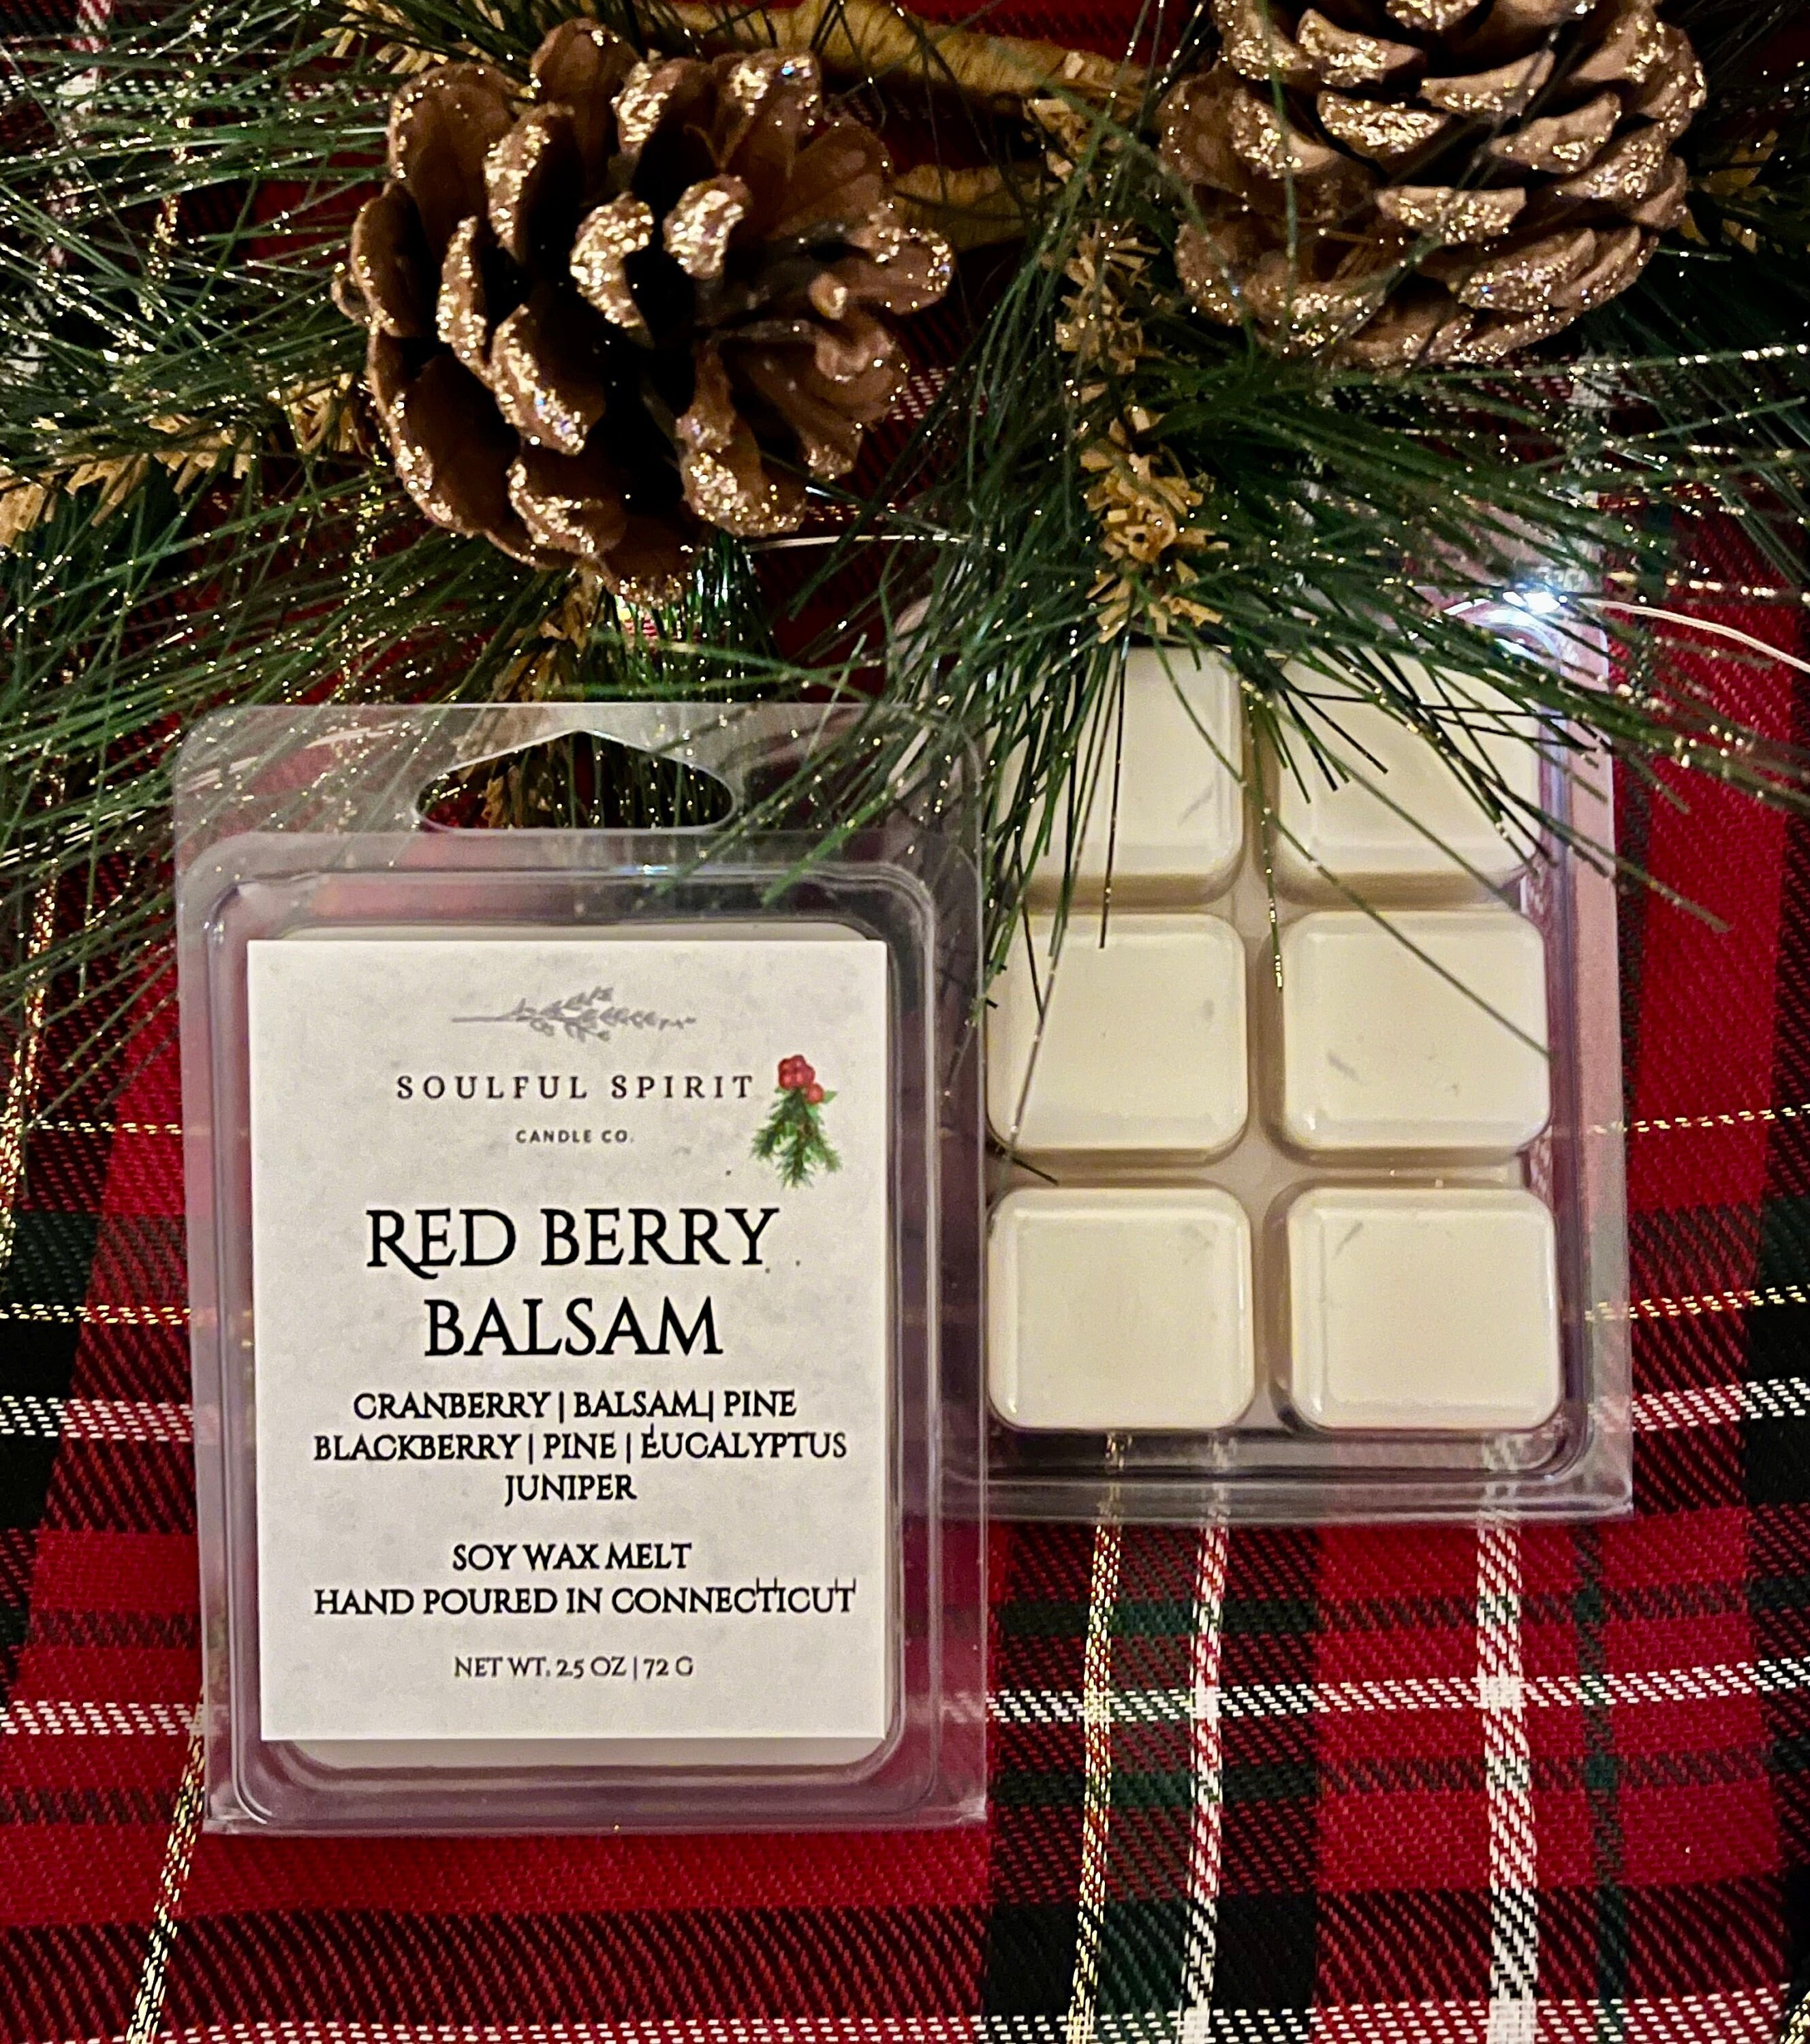 Christmas Wax Melts Merry & Bright - White & Red 3 oz.